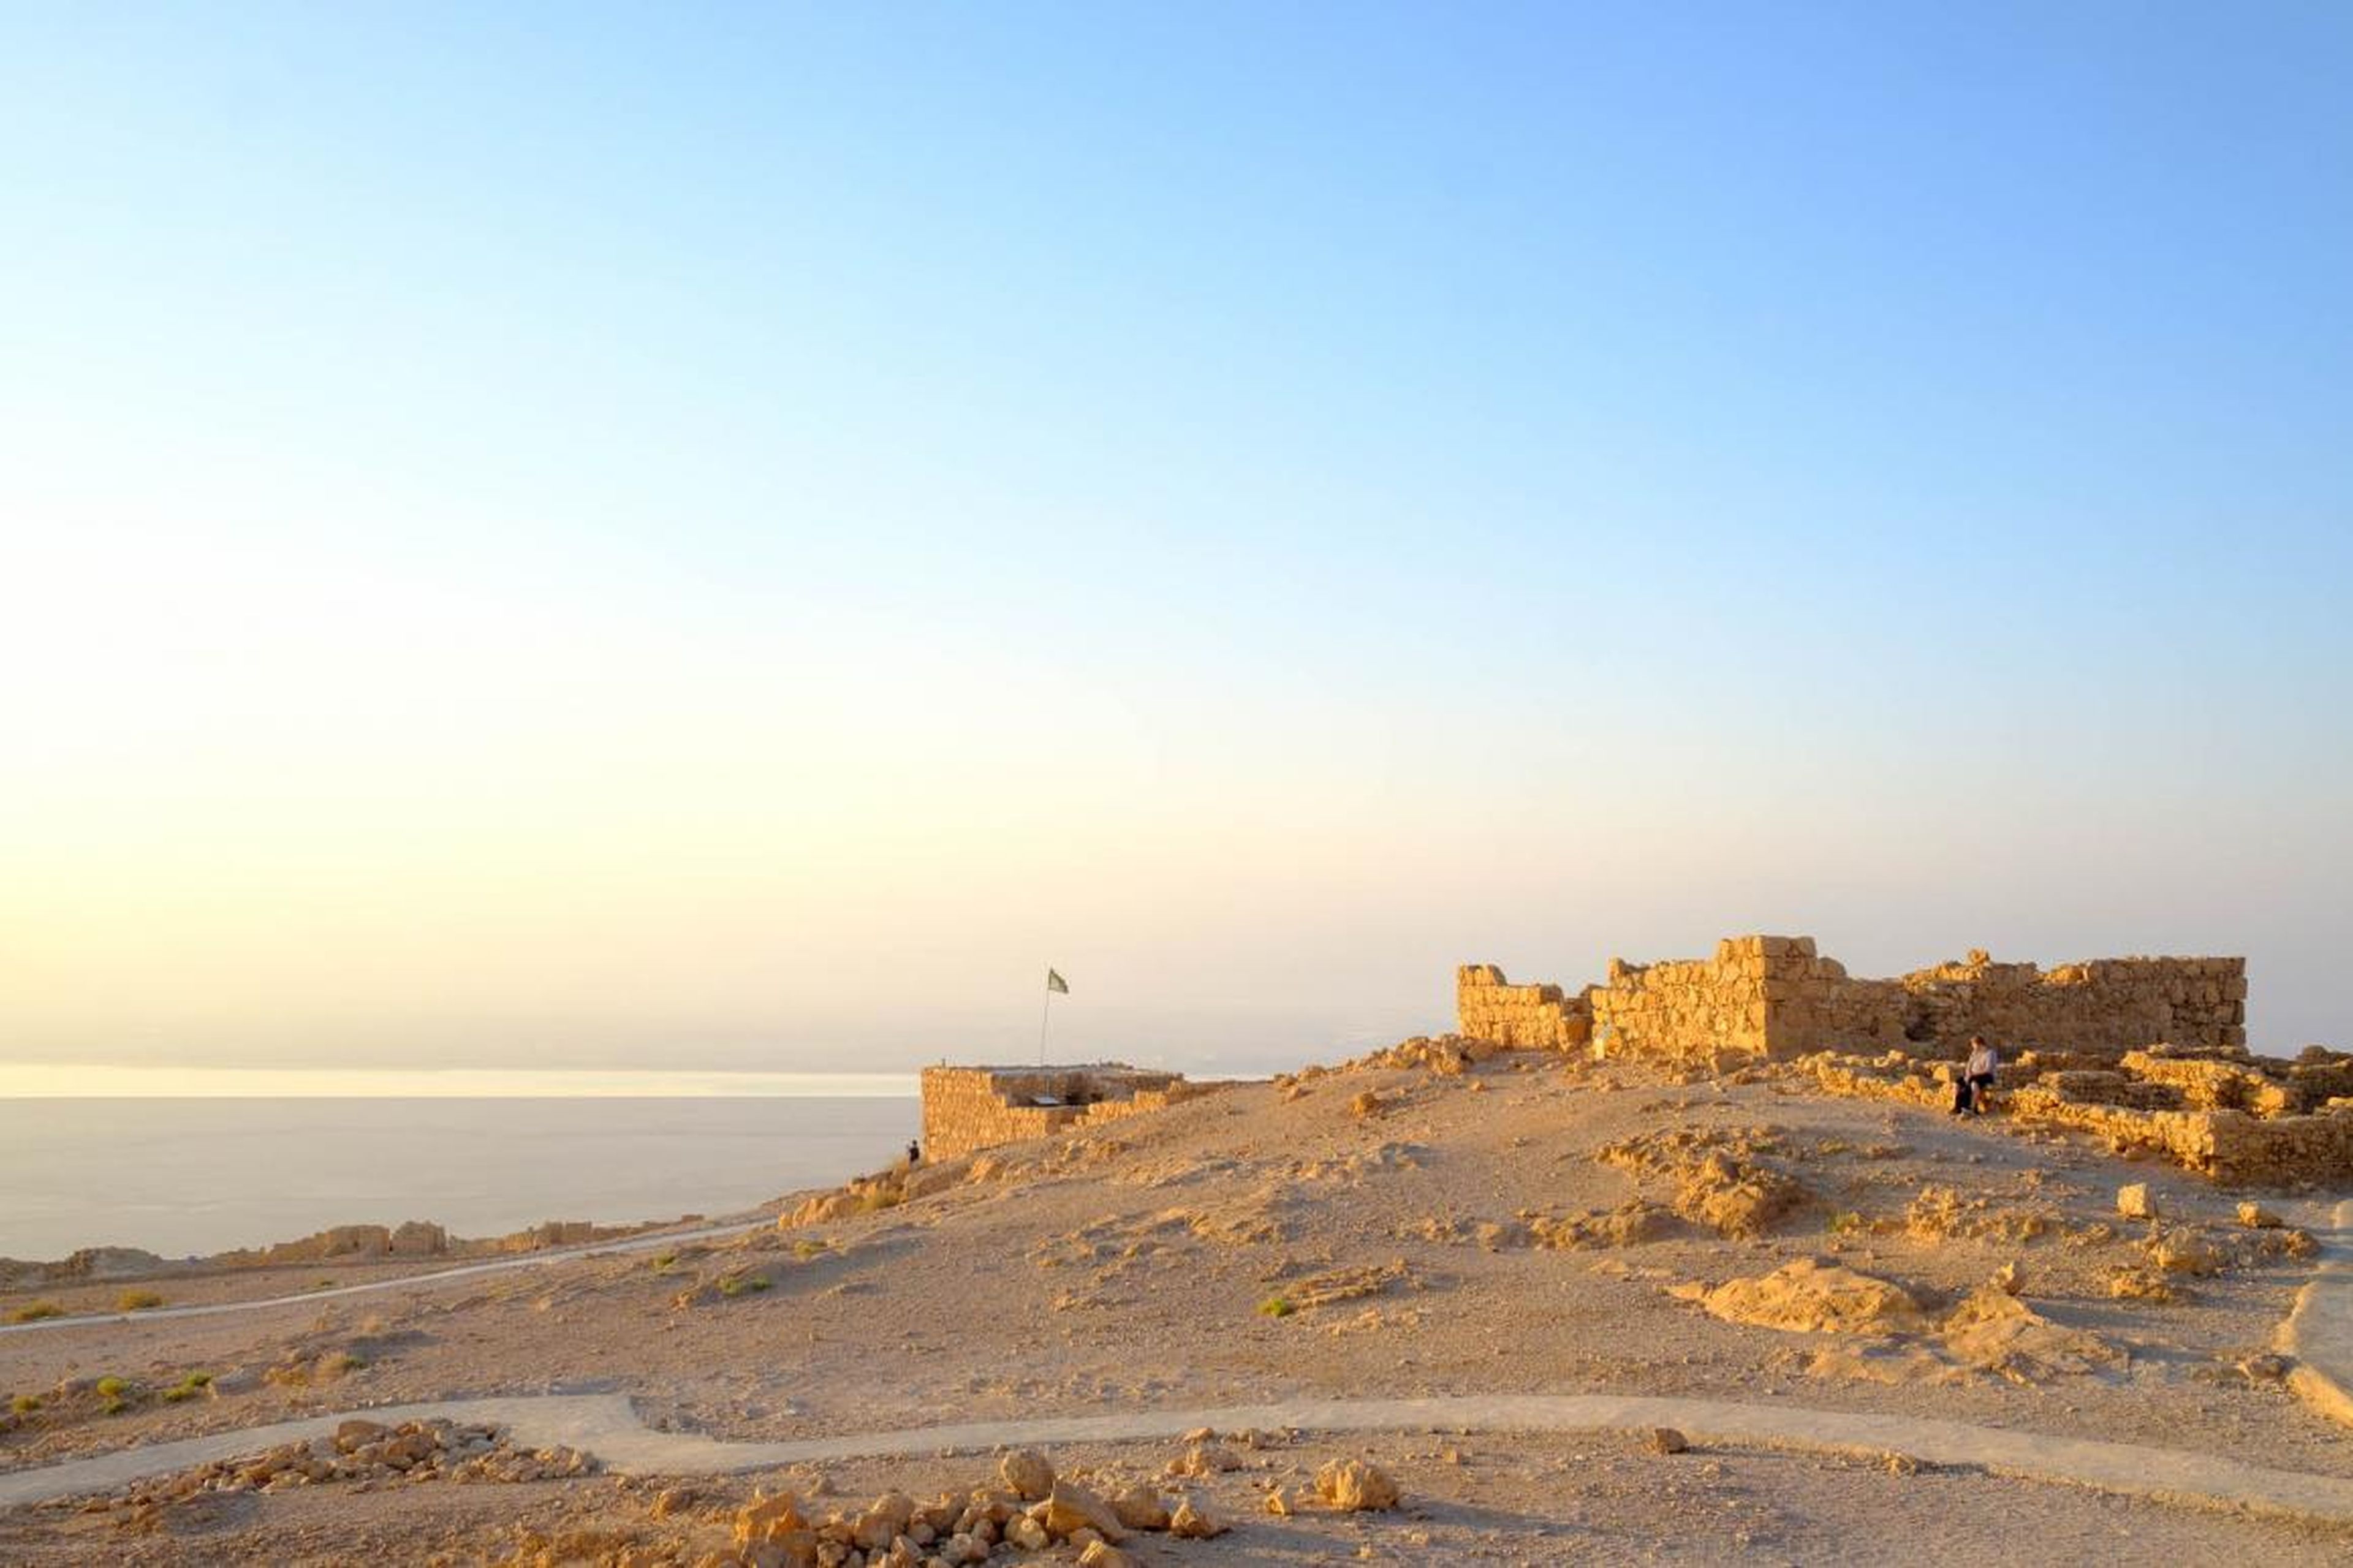 After about an hour or so of strenuous hiking, I reached the fortress just as the sun was rising. The complex, a stunning set of ruins, was enveloped in golden light.